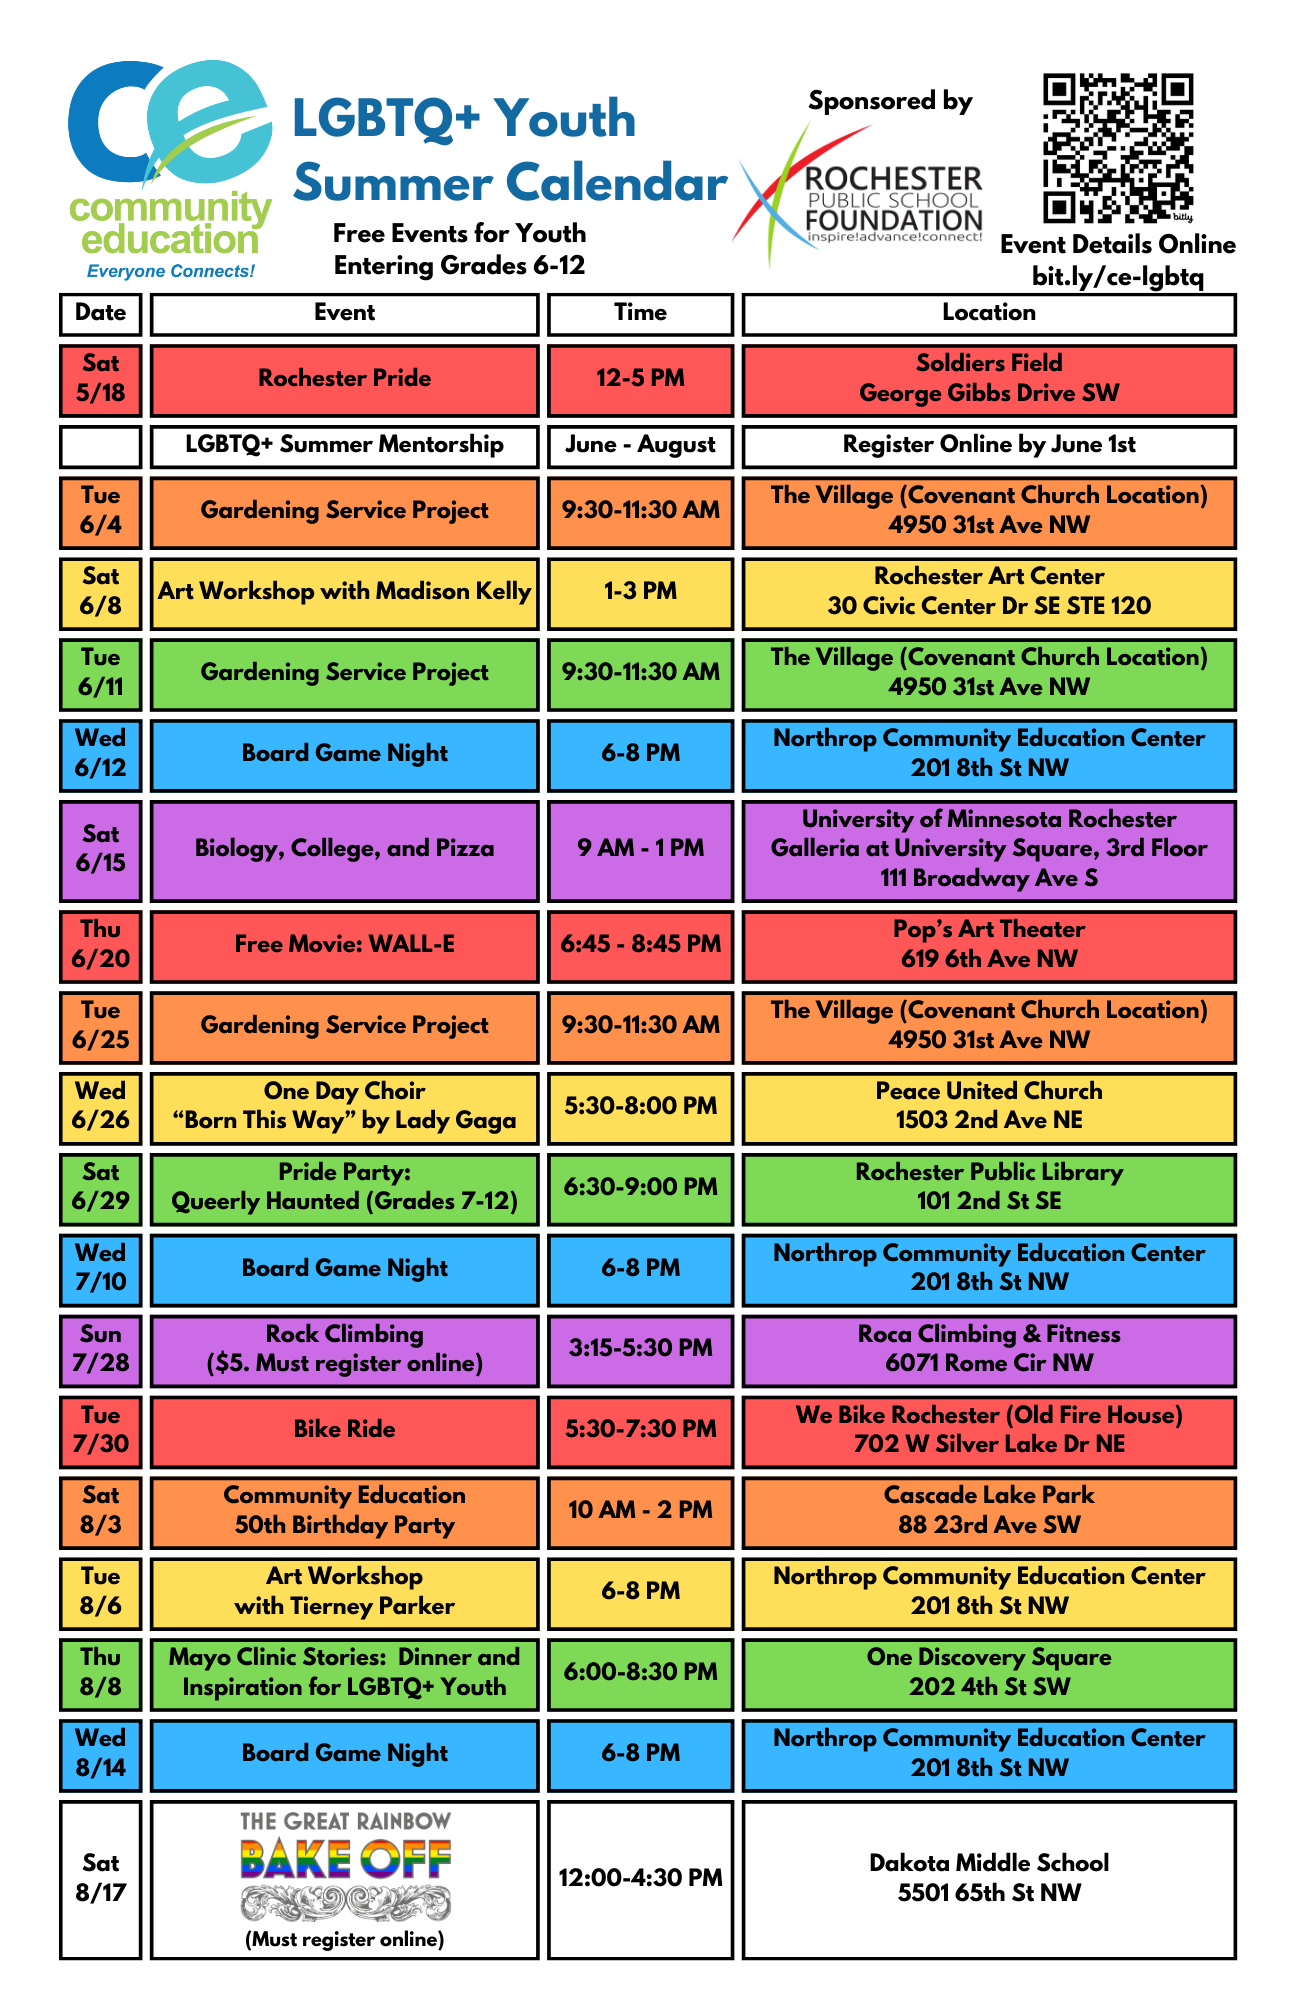 LGBTQ+ Youth Summer Calendar. Each row has a date, time, and location listed